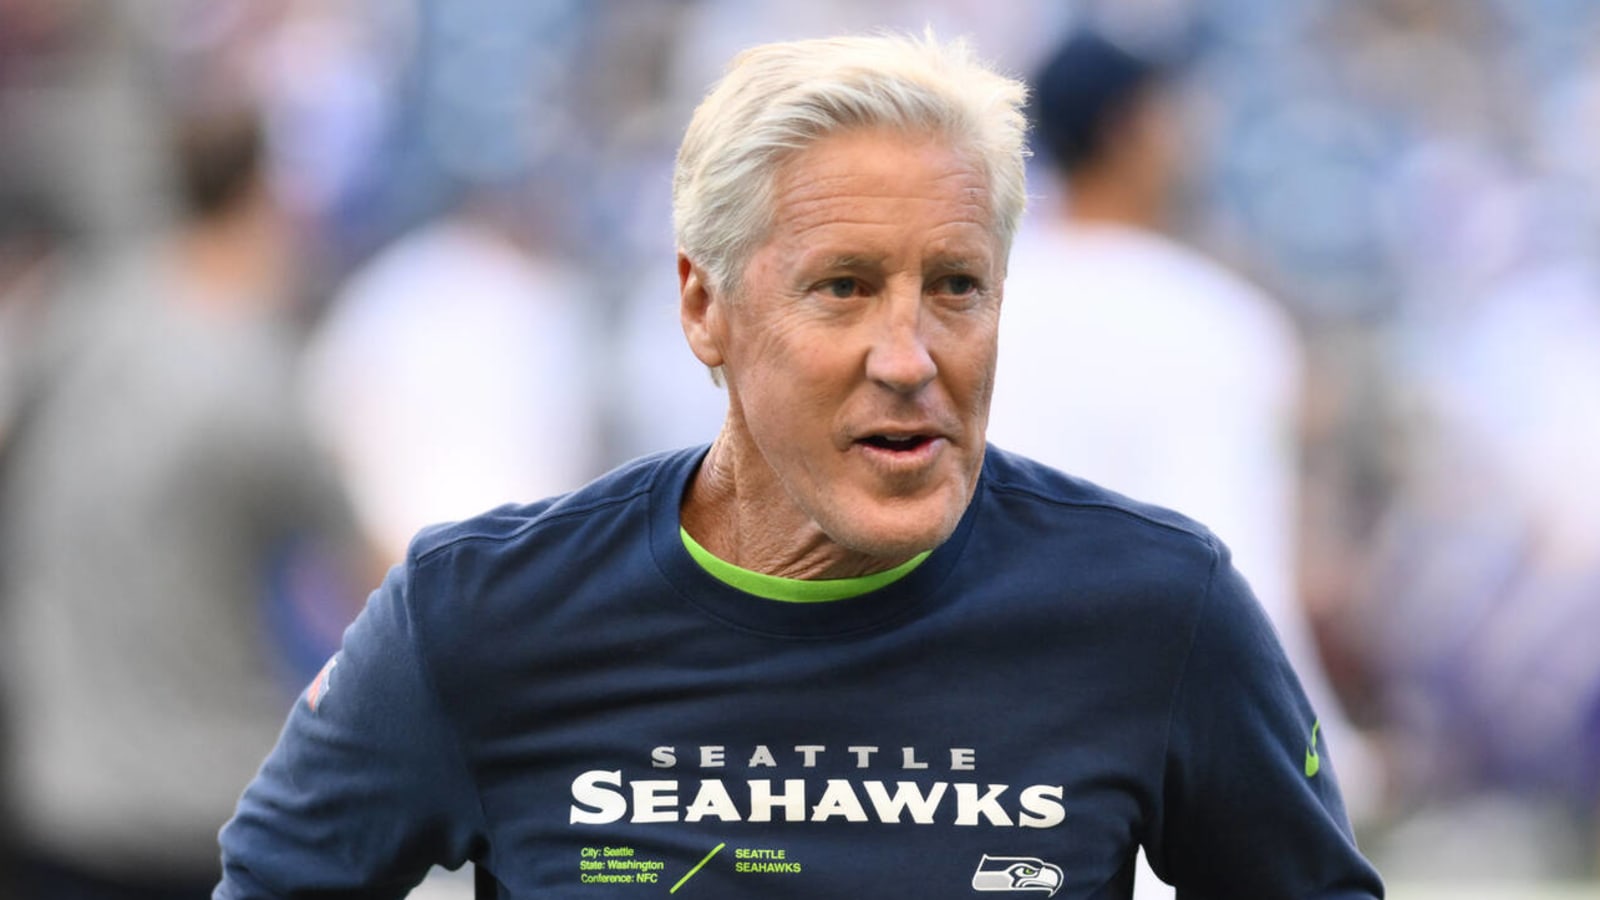 Pete Carroll speaks out about reaction to his viral QB video